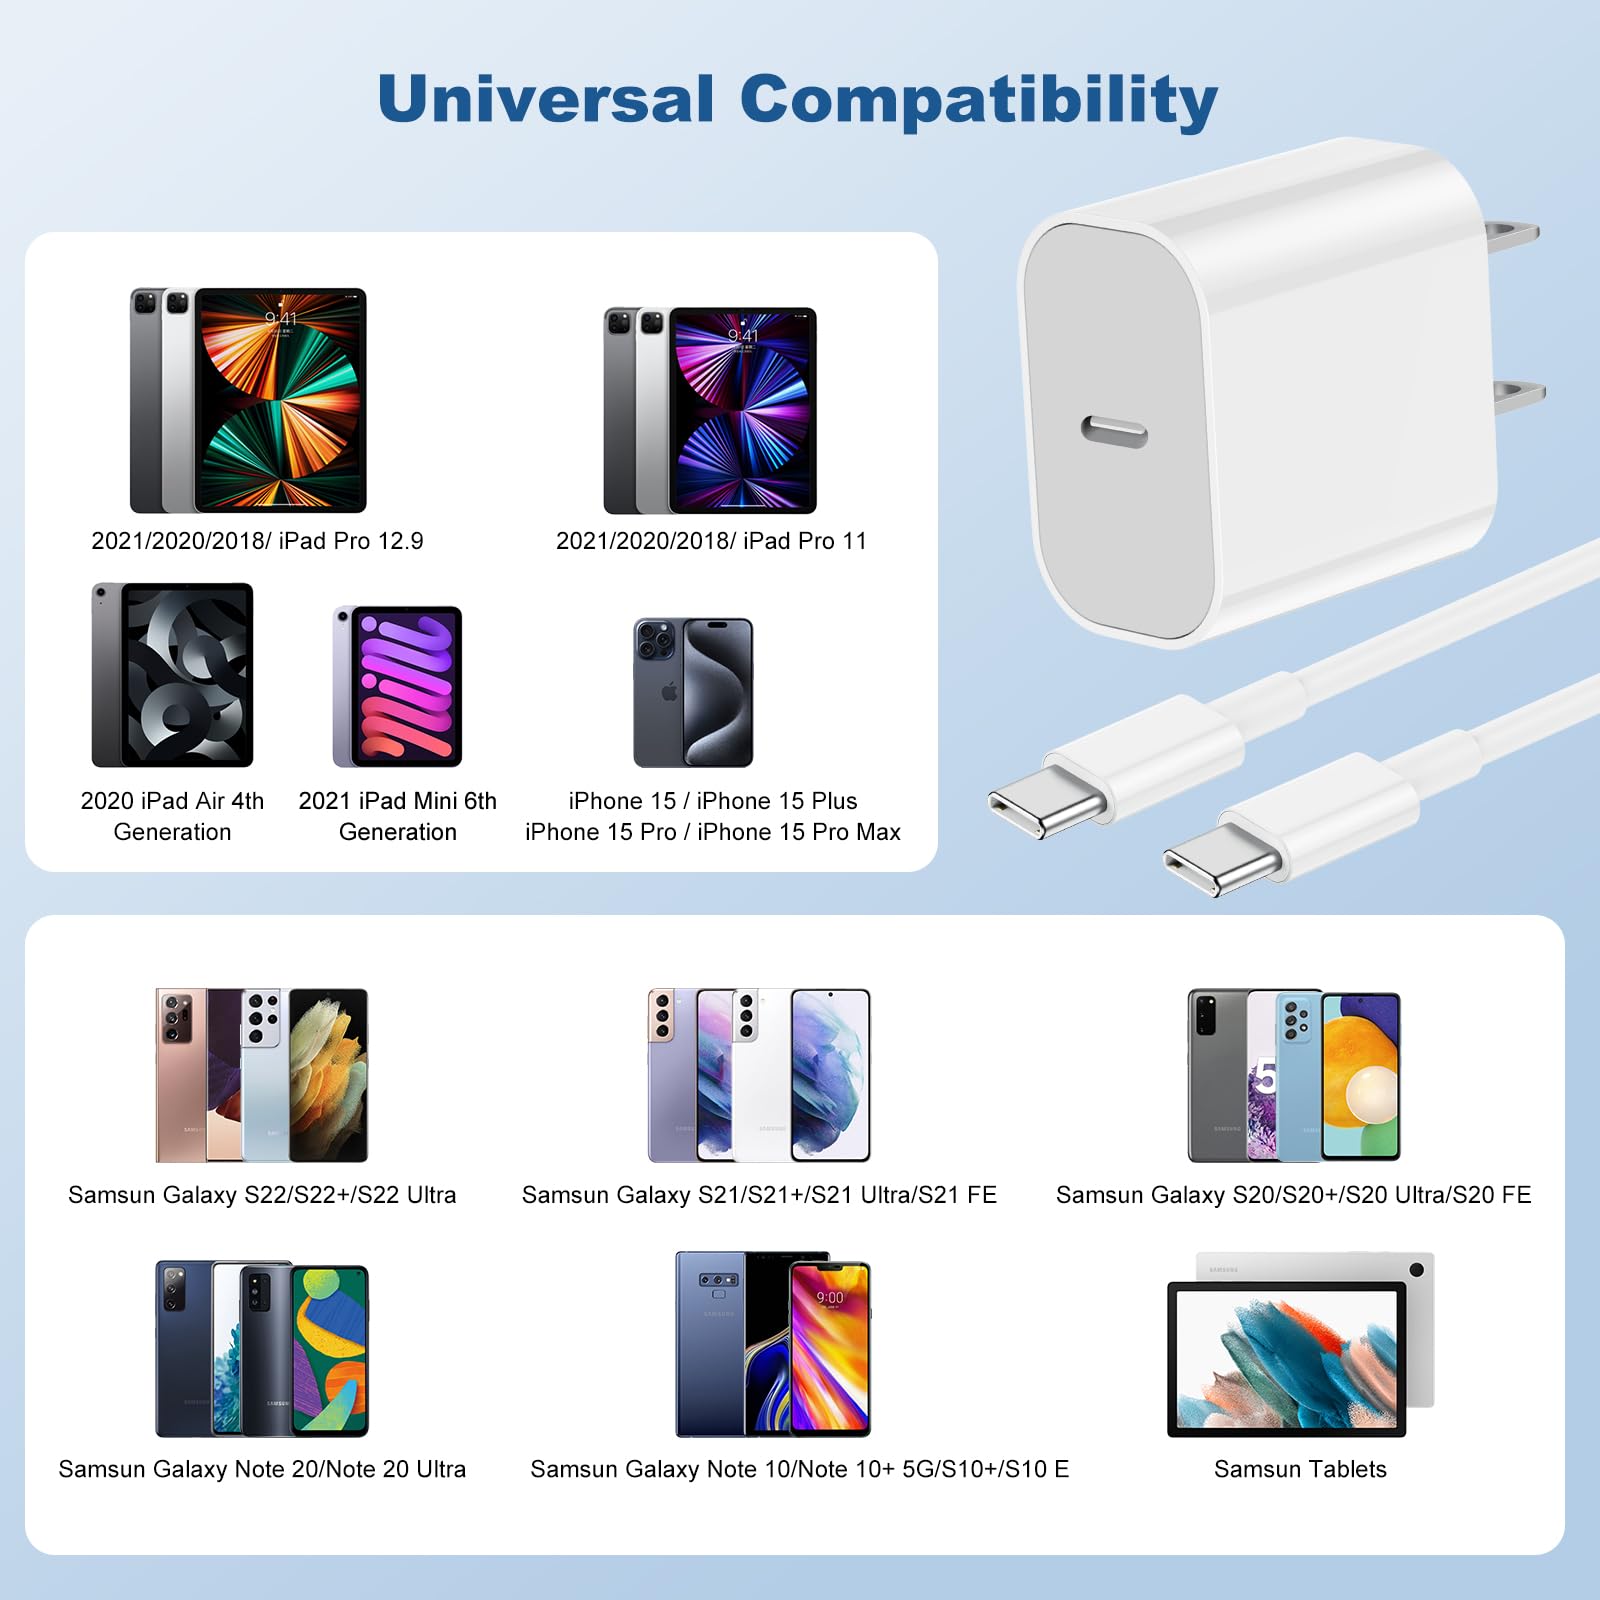 iPhone 15 Fast Charger,20W USB C Wall Charger with 60W USB C to C Charging Cable(6FT) for iPhone 15/15 Pro/15 Pro Max,2022 iPad Pro 11/12.9 inch,New iPad Air 5th/4th,iPad 10th Generation,iPad Mini 6